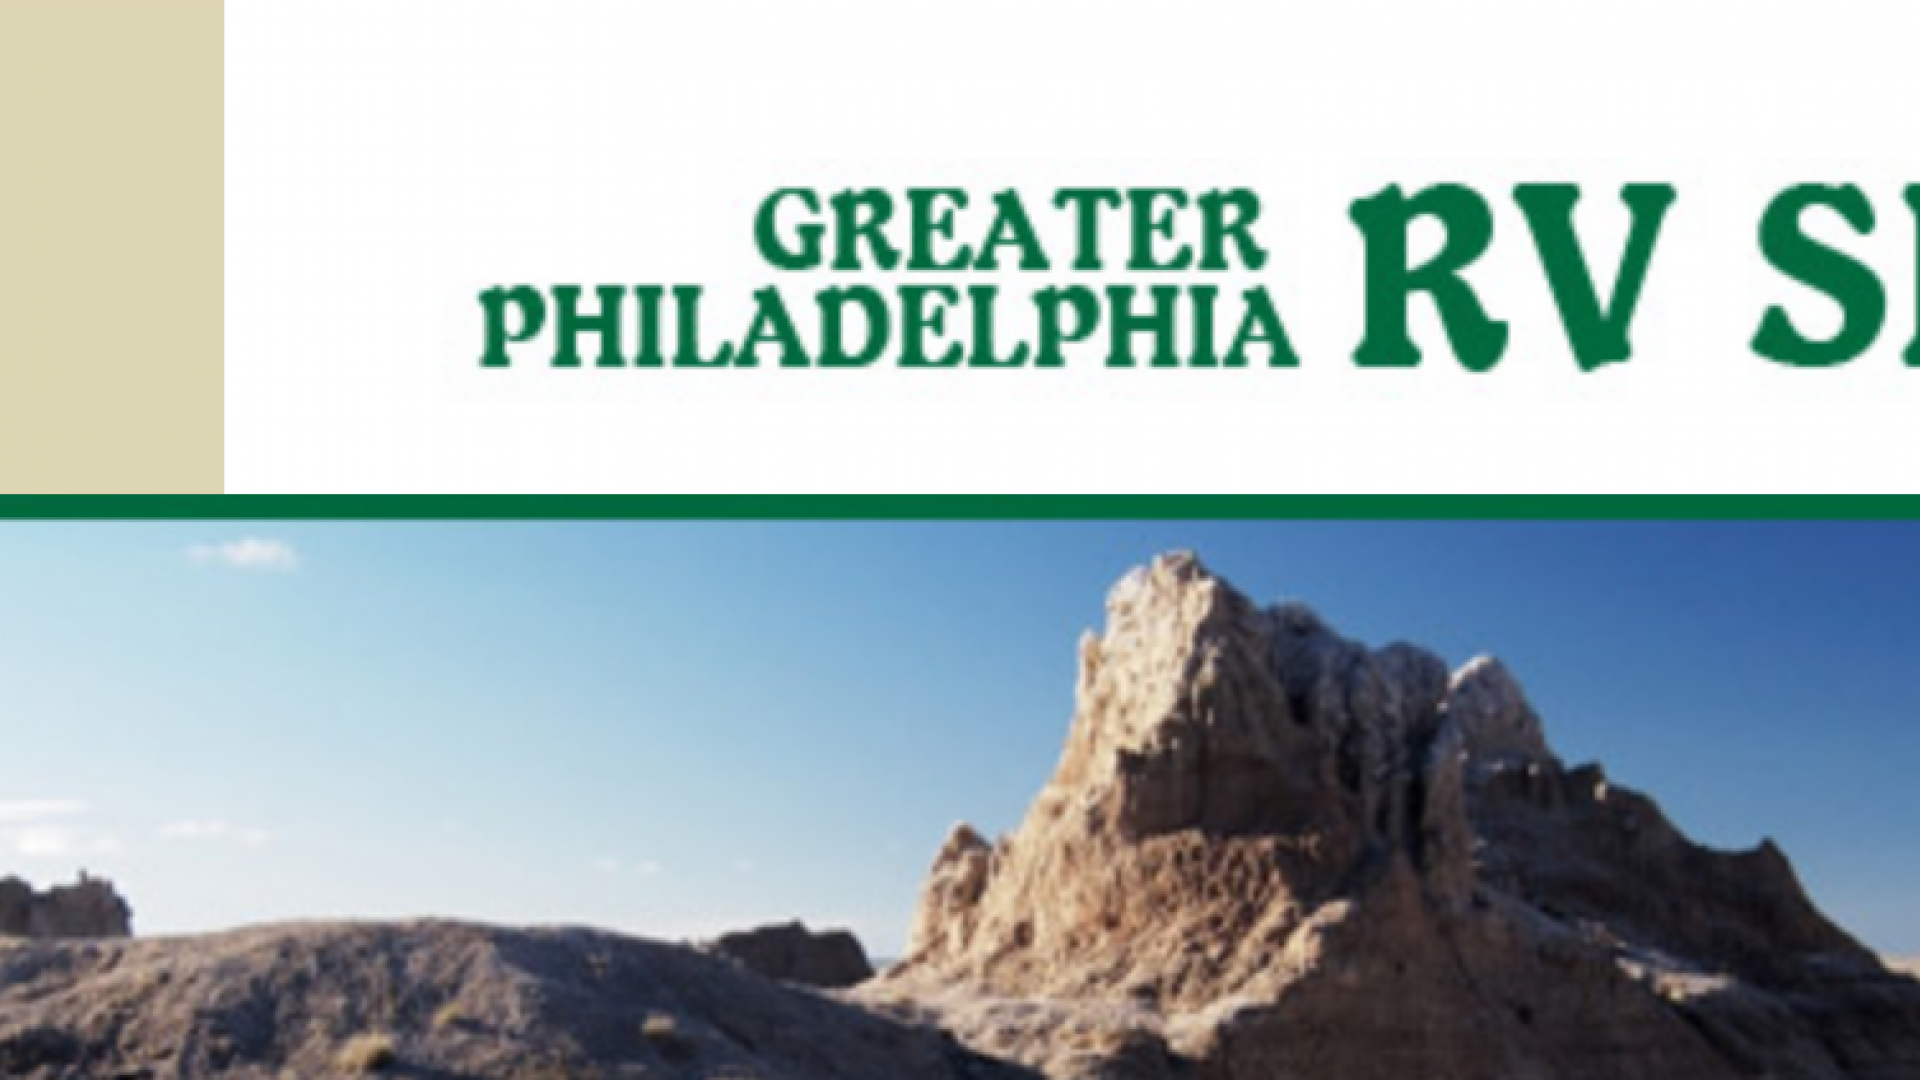 The Greater Philadelphia RV Show GDRV4Life Your Connection to the